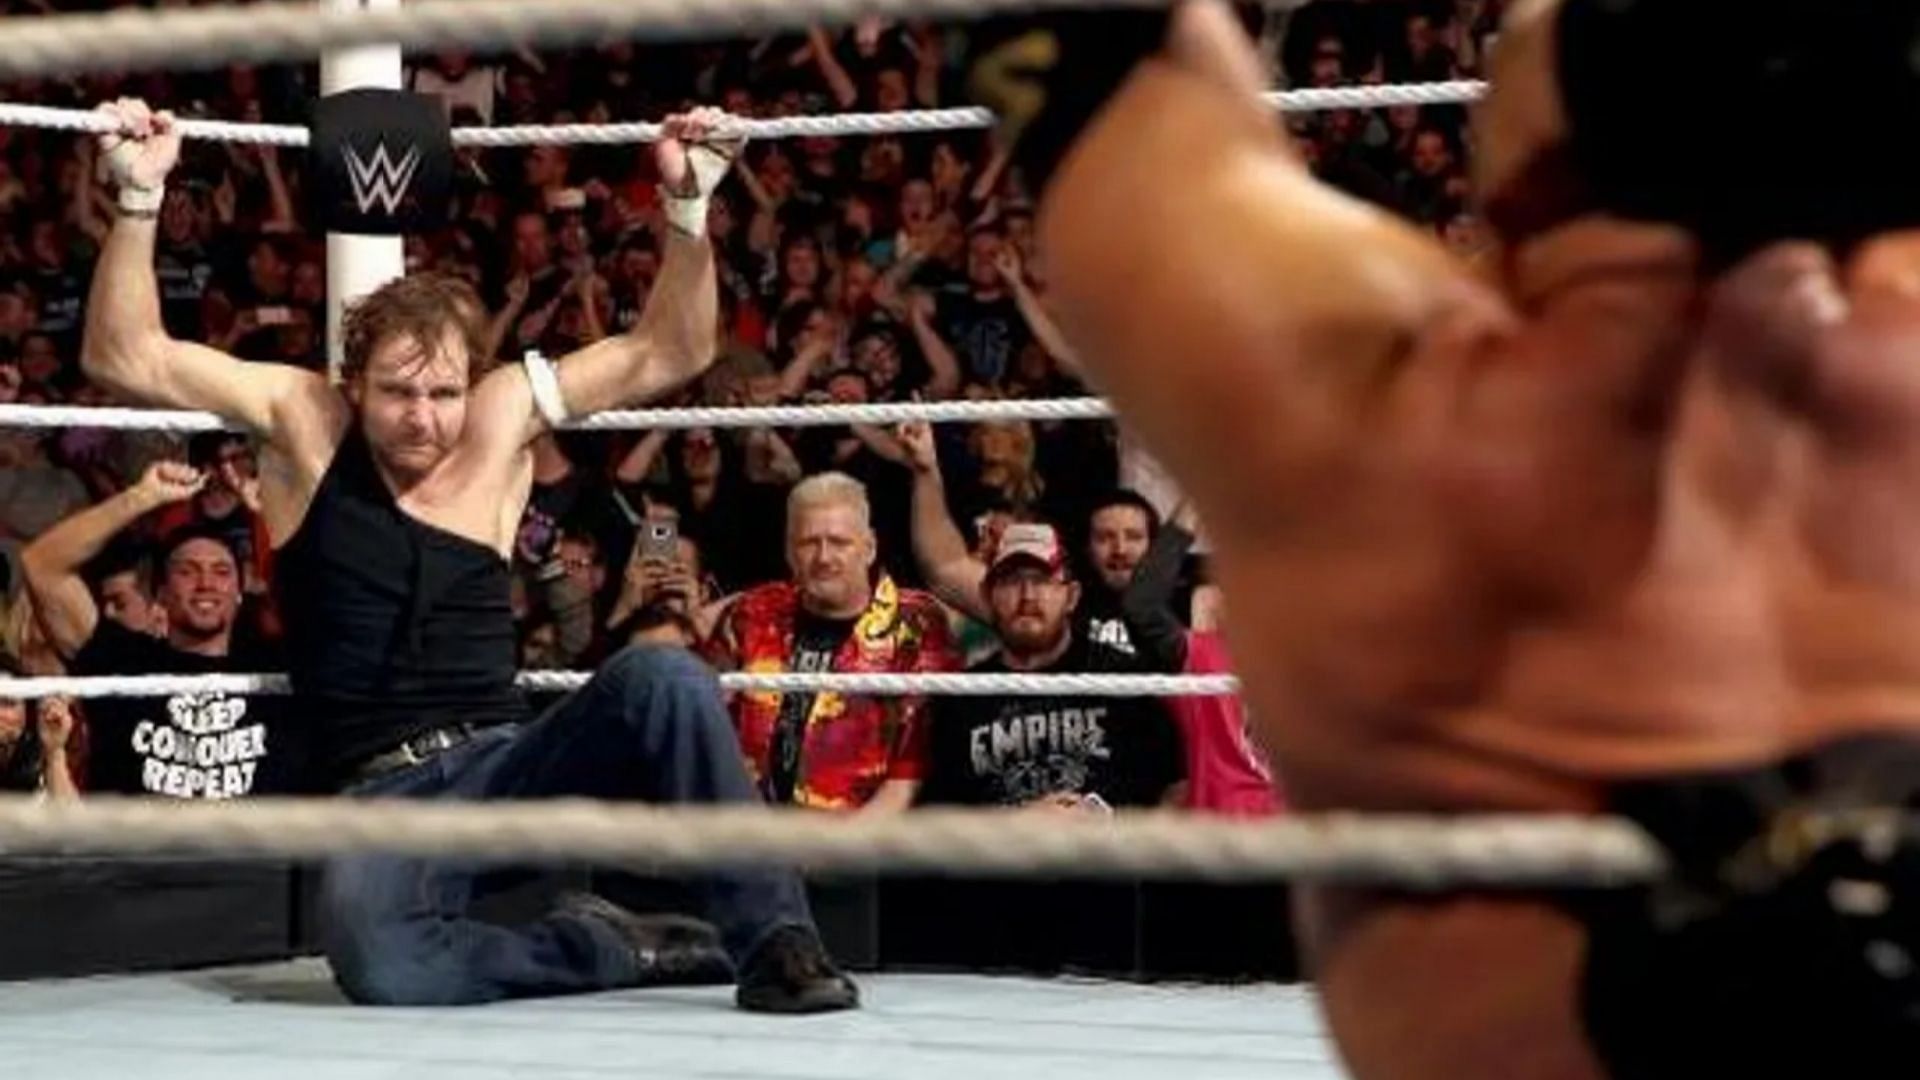 Jon Moxley, then Dean Ambrose, opposite Triple H in the closing moments of the 2016 Royal Rumble